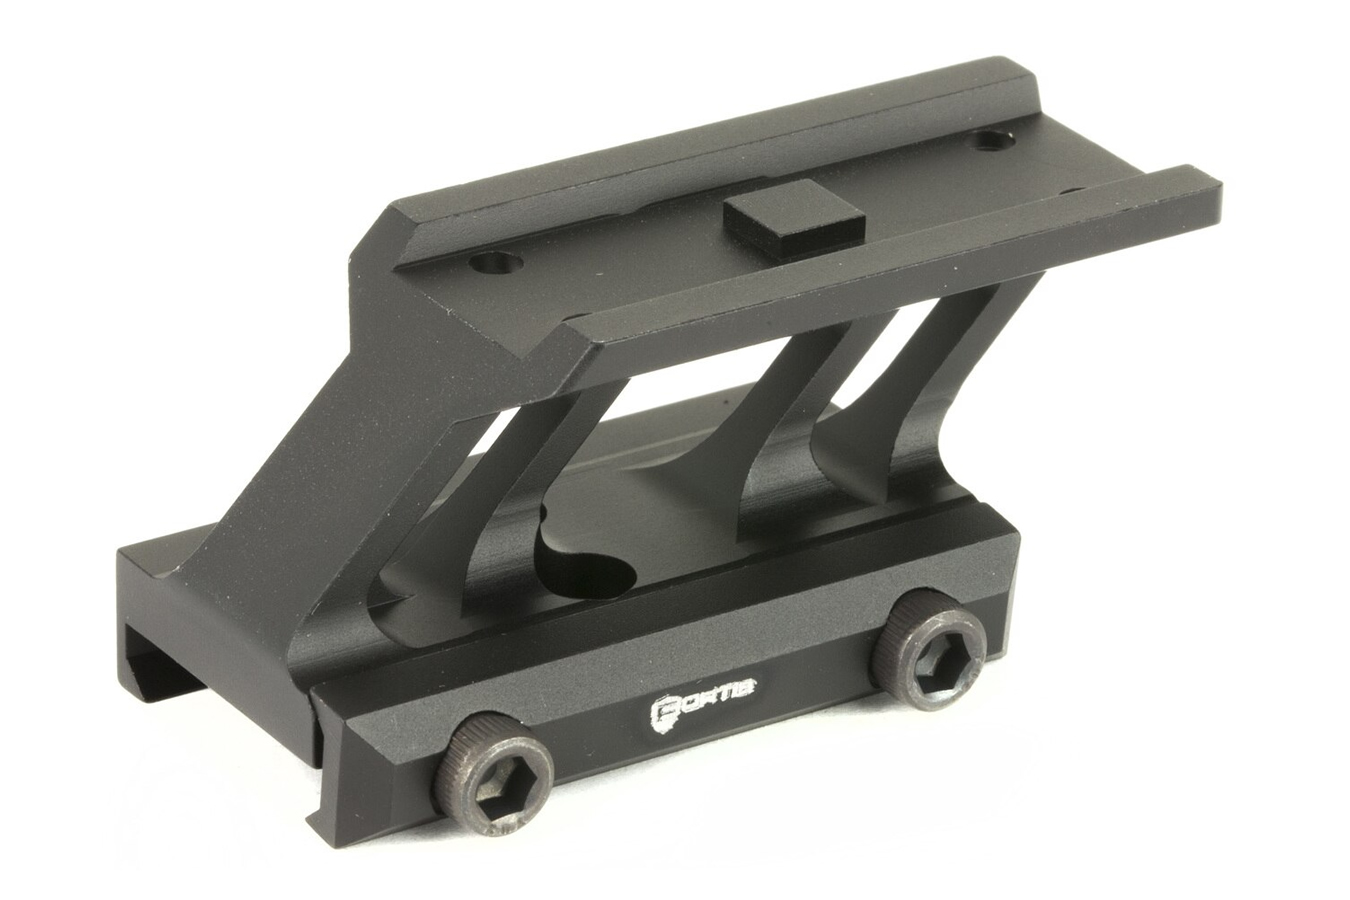 FORTIS MANUFACTURING F1 OPTIC MOUNT (ABSOLUTE)